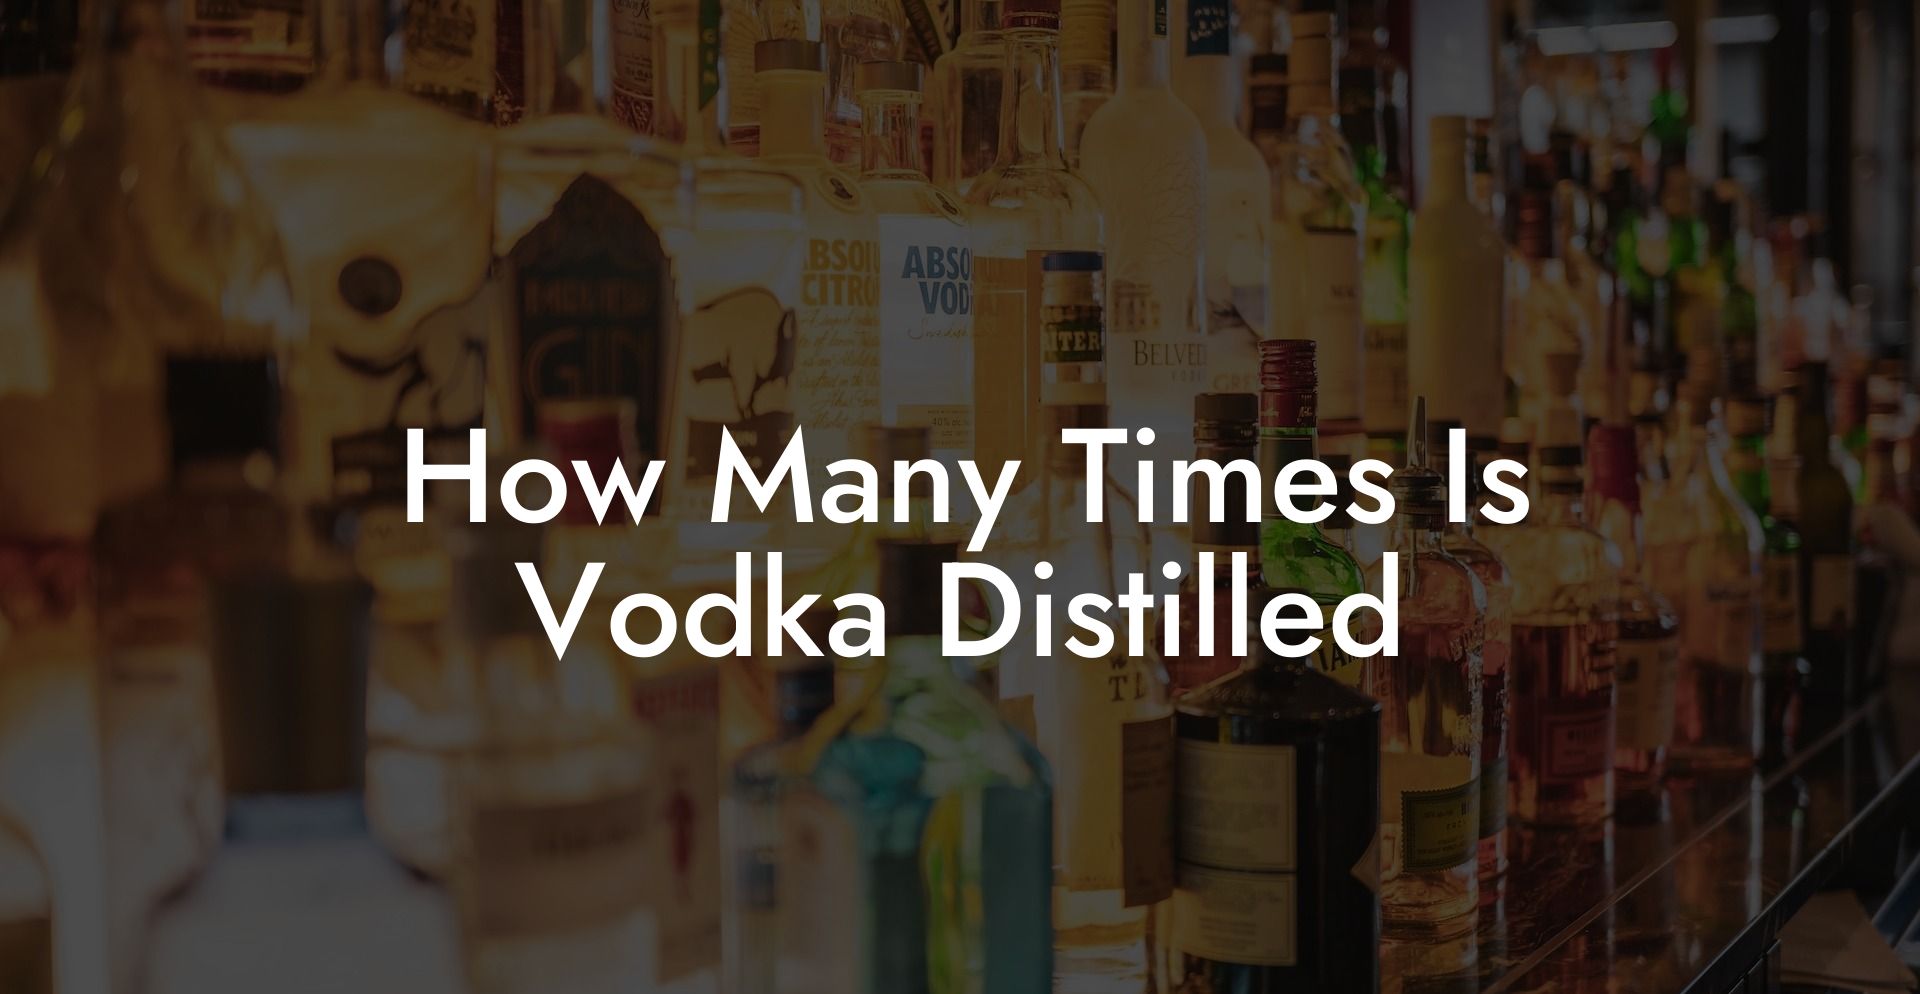 How Many Times Is Vodka Distilled